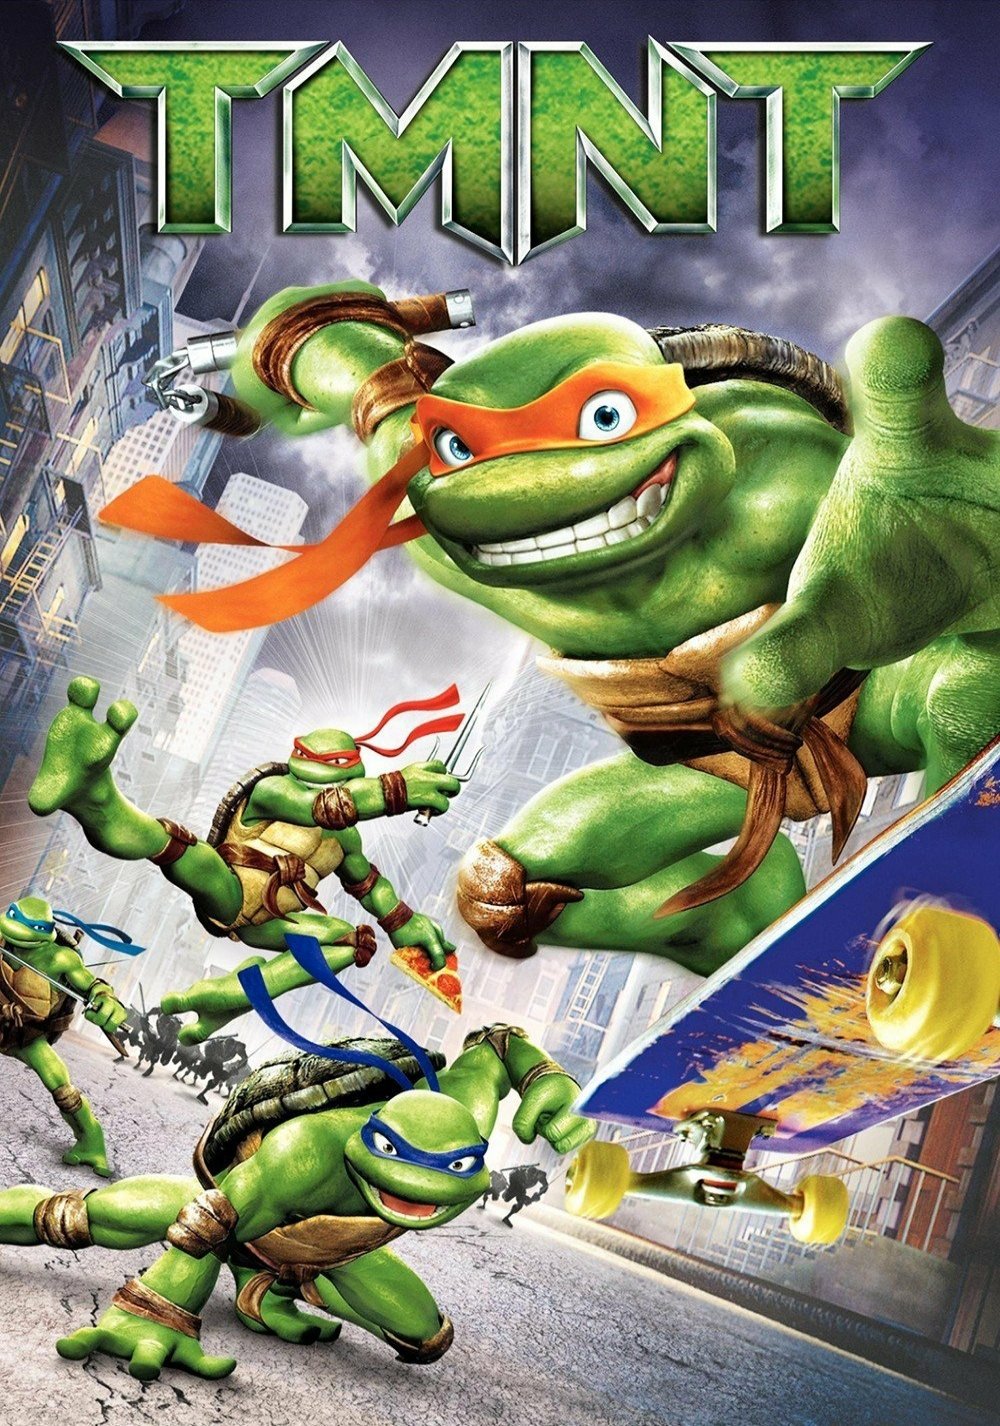 TMNT (2007) Picture Image Abyss